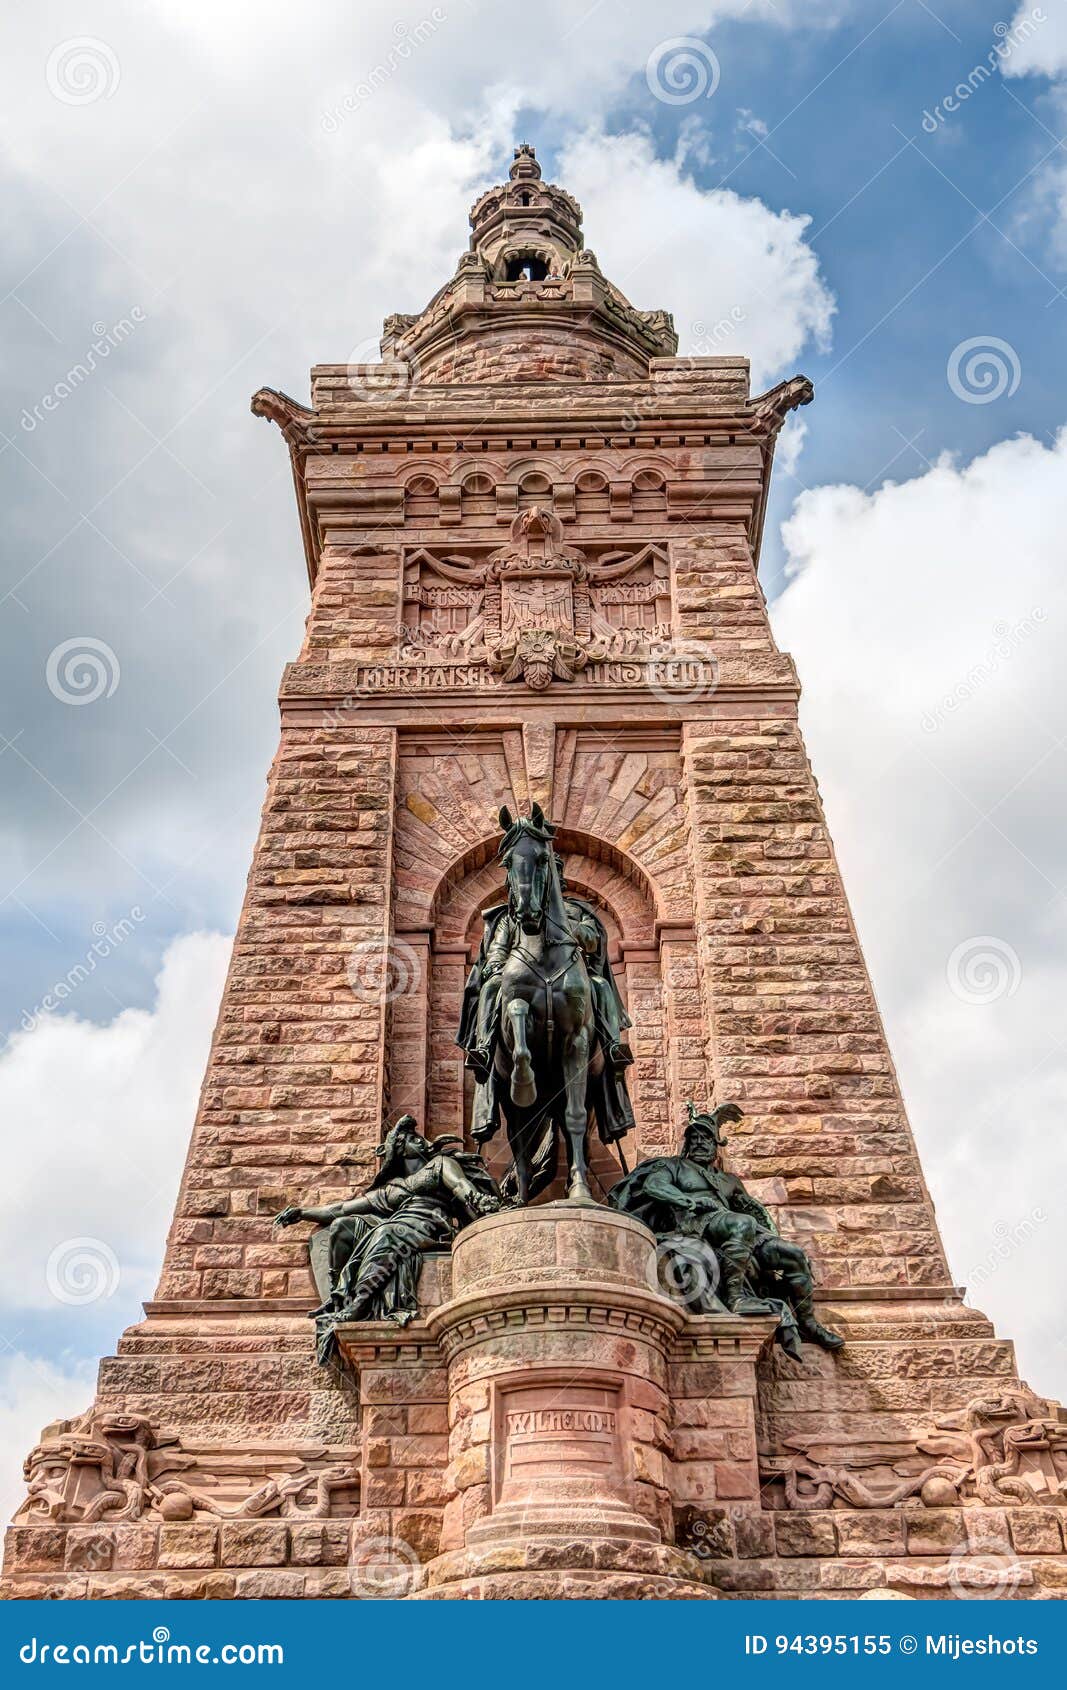 barbarossa monument in thuringia, germany